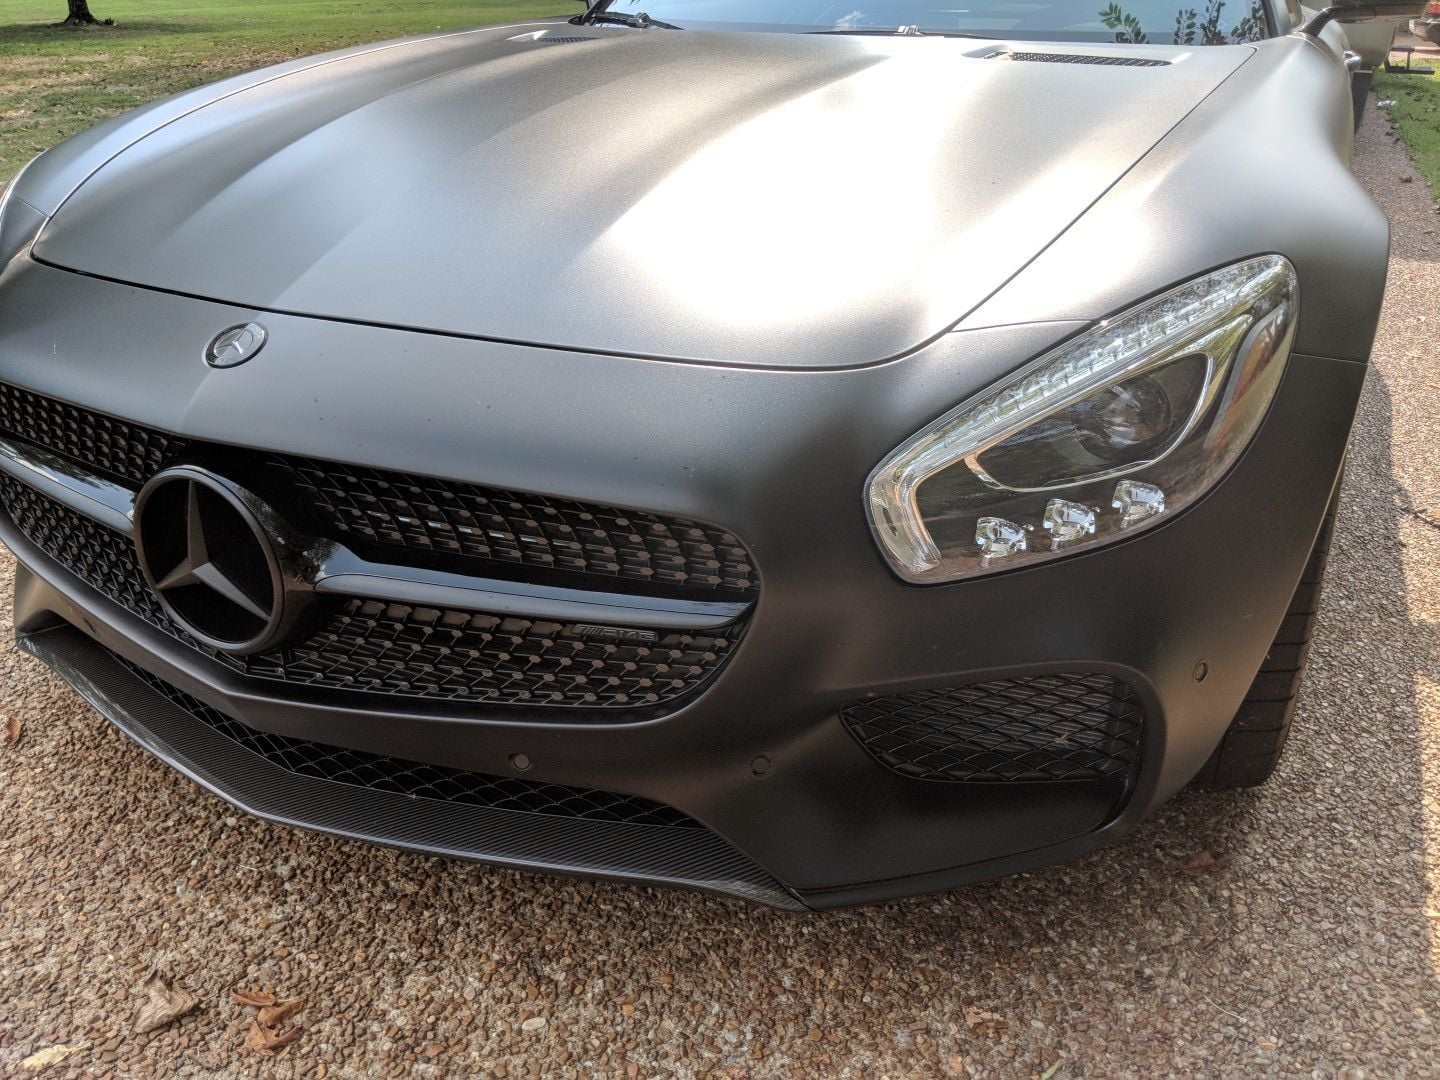 2016 Mercedes-Benz AMG GT S - 2016 AMG GTS with all options except CF engine cover and lane assist 8700mi 112k - Used - VIN WDDYJ7JA5GA007391 - 900 Miles - 8 cyl - 2WD - Automatic - Coupe - Black - Franklin, TN 37069, United States